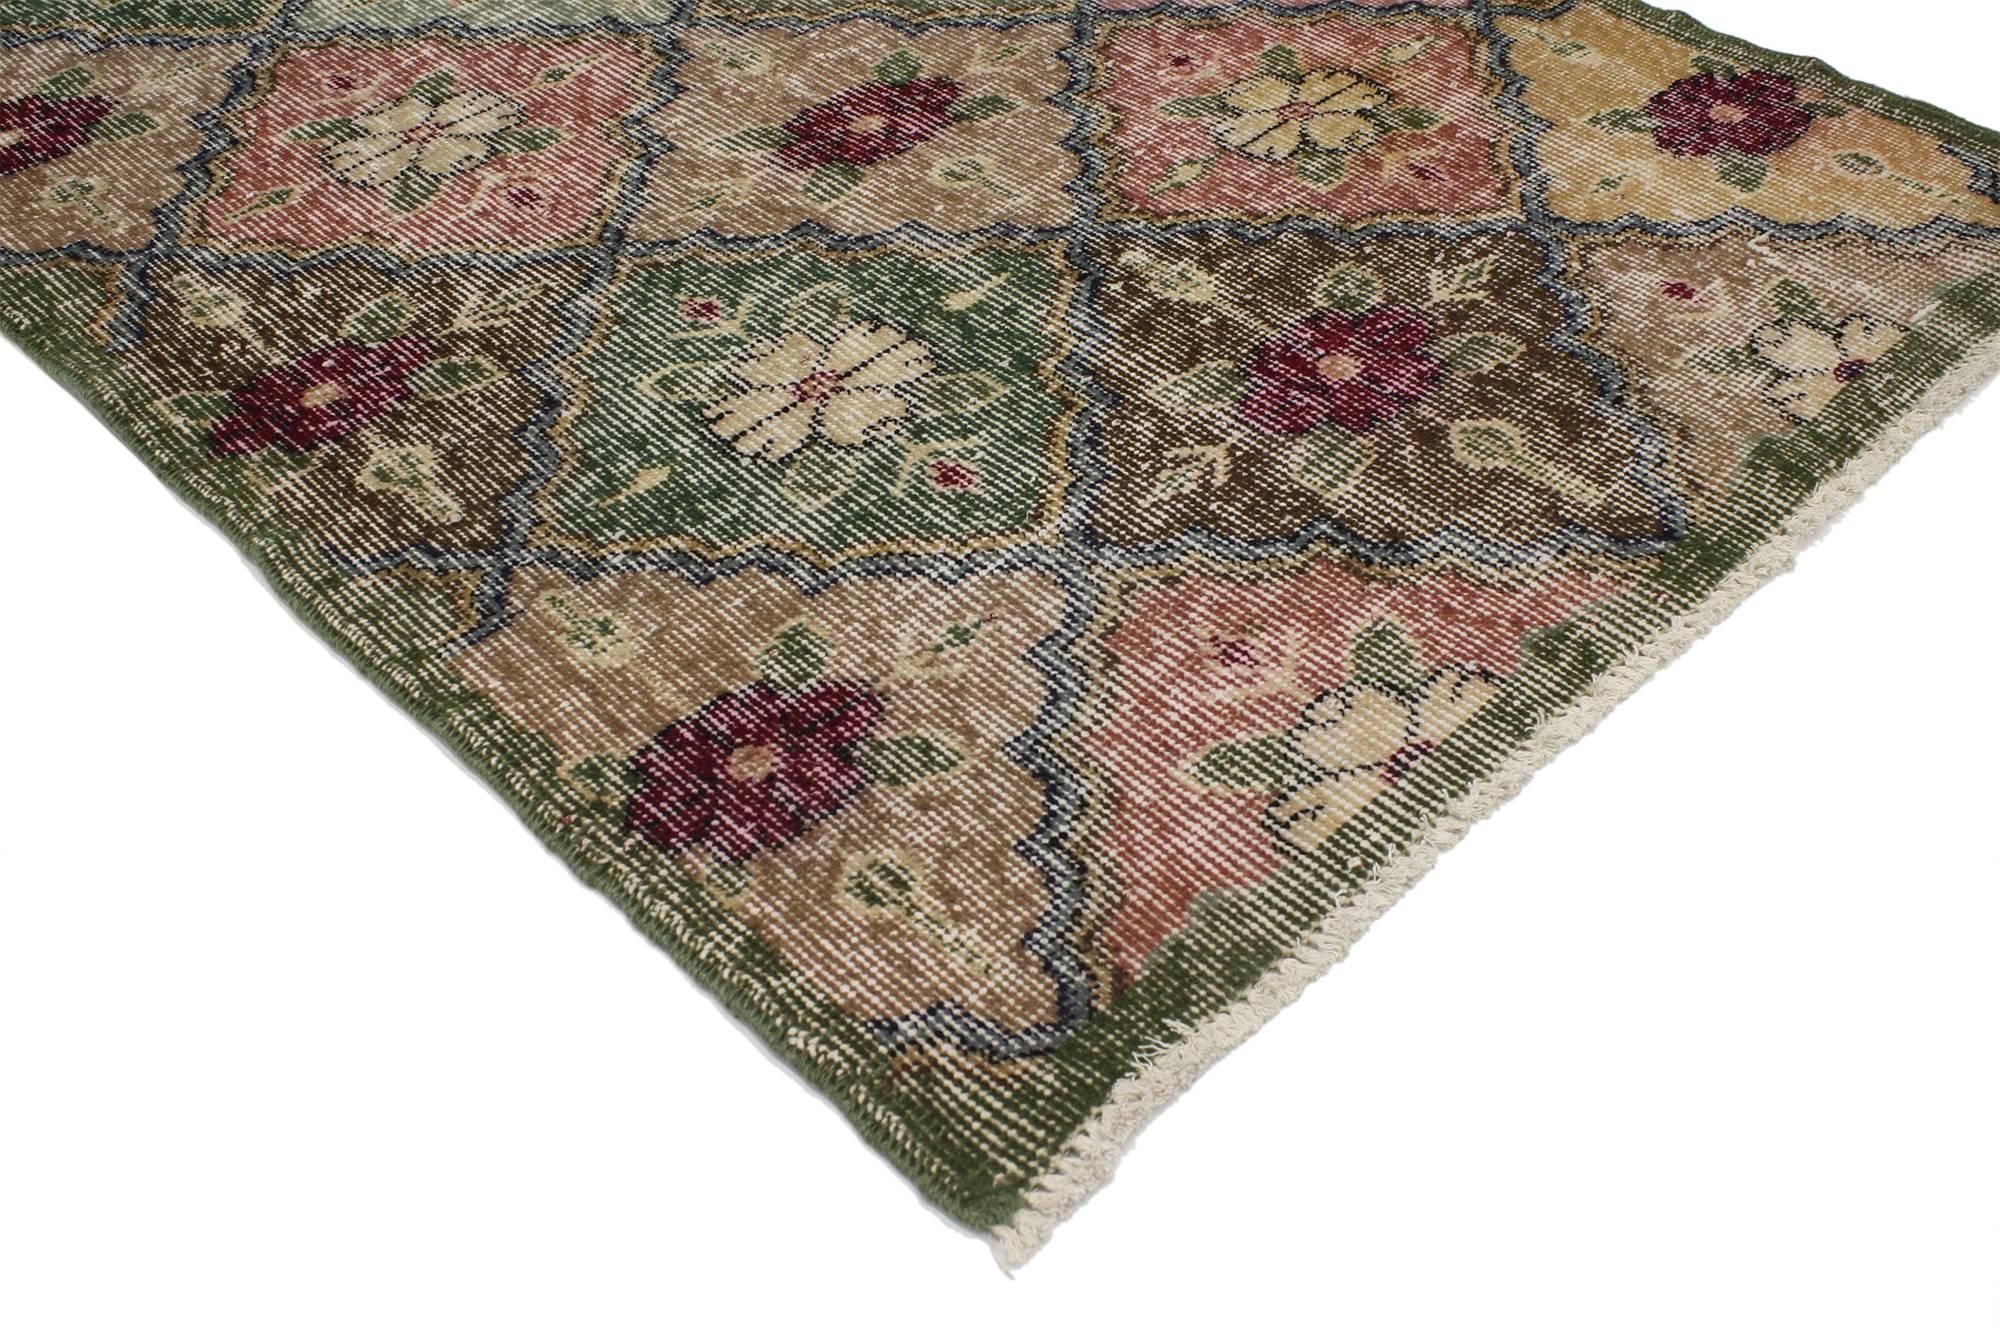 51948 Distressed Vintage Turkish Sivas Runner with Arts & Crafts Cottage Style 03'00 x 06'10. Reflecting elements of nature and botanical design, this hand knotted wool distressed vintage Turkish Sivas rug awakens the soul with elevated Arts and